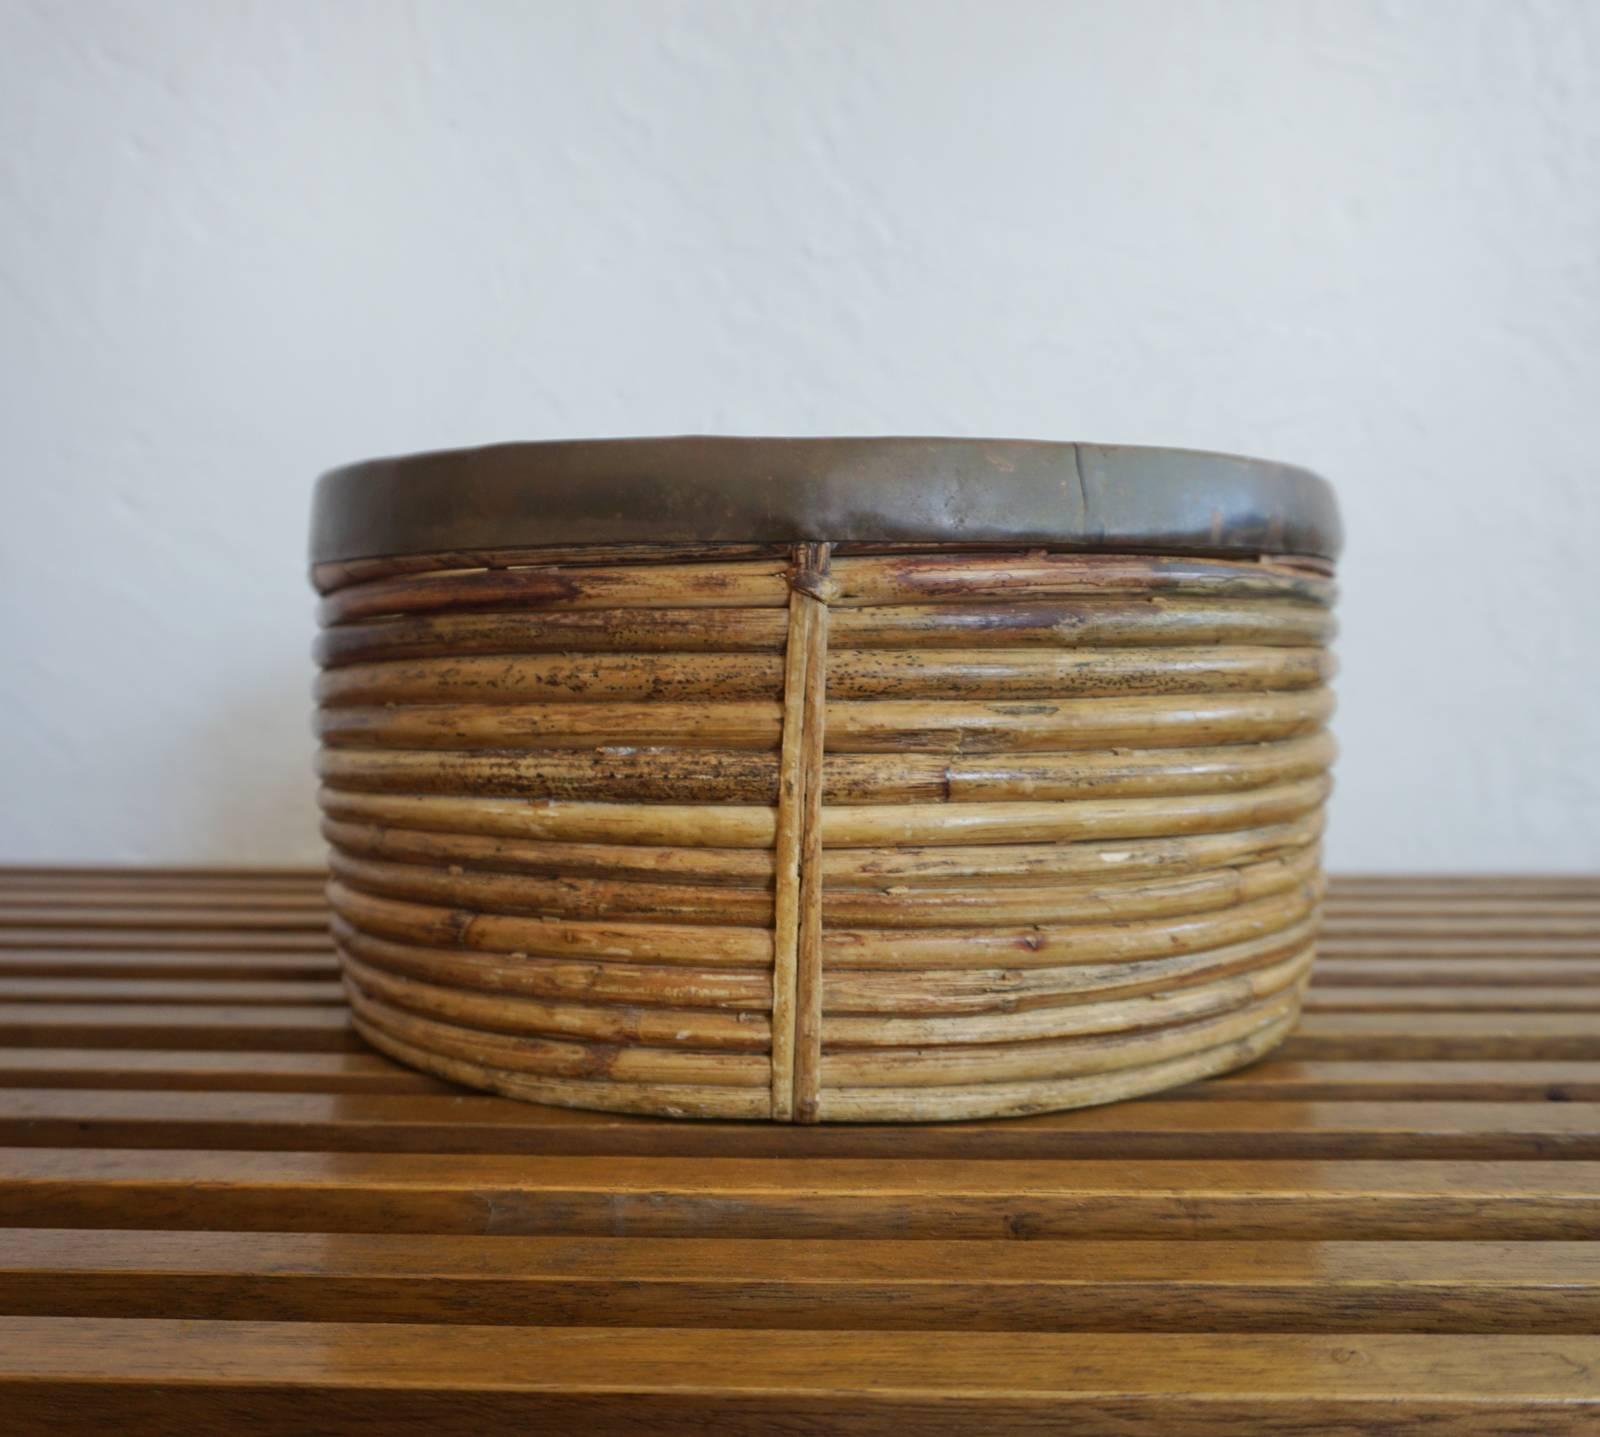 Rattan bowl with copper rim. Designed by John Risley for Raymor. Produced in the early 1950s.

Starting in 1951, John Risley worked with local craftspeople in the Philippines to develop products for the US market. Companies like Raymor imported